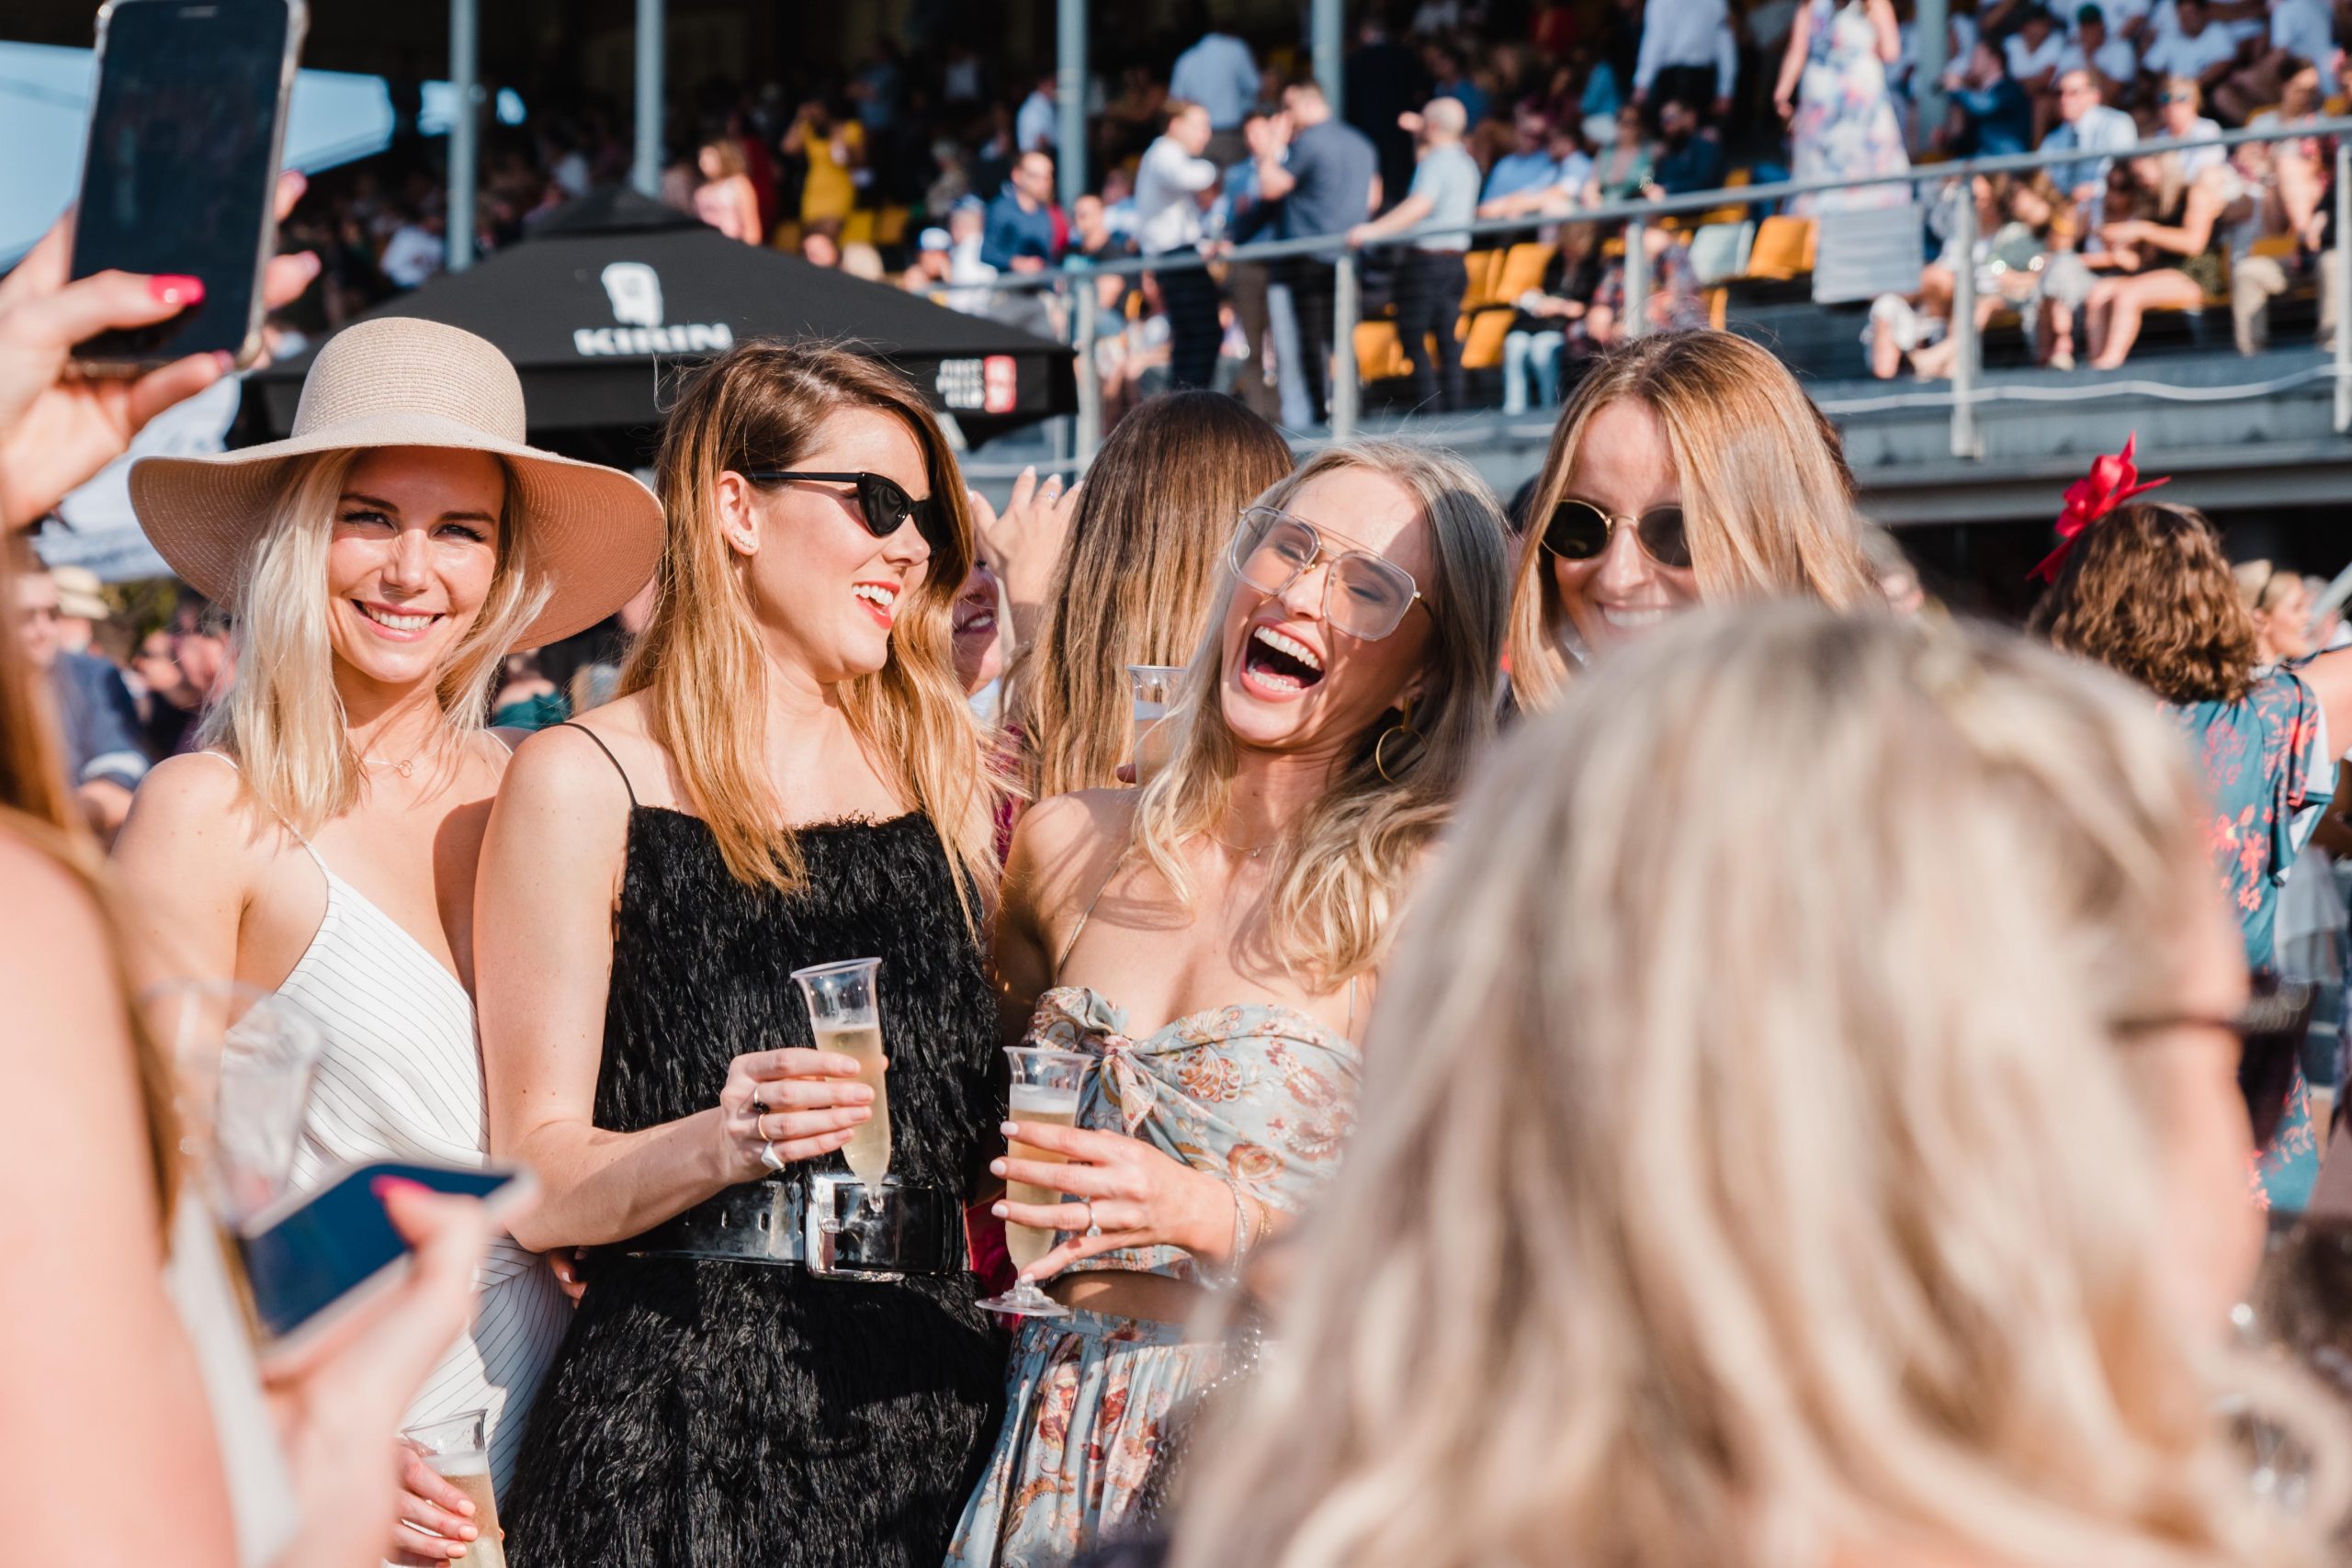 Newcastle Spring Racing Carnival Ladies Day